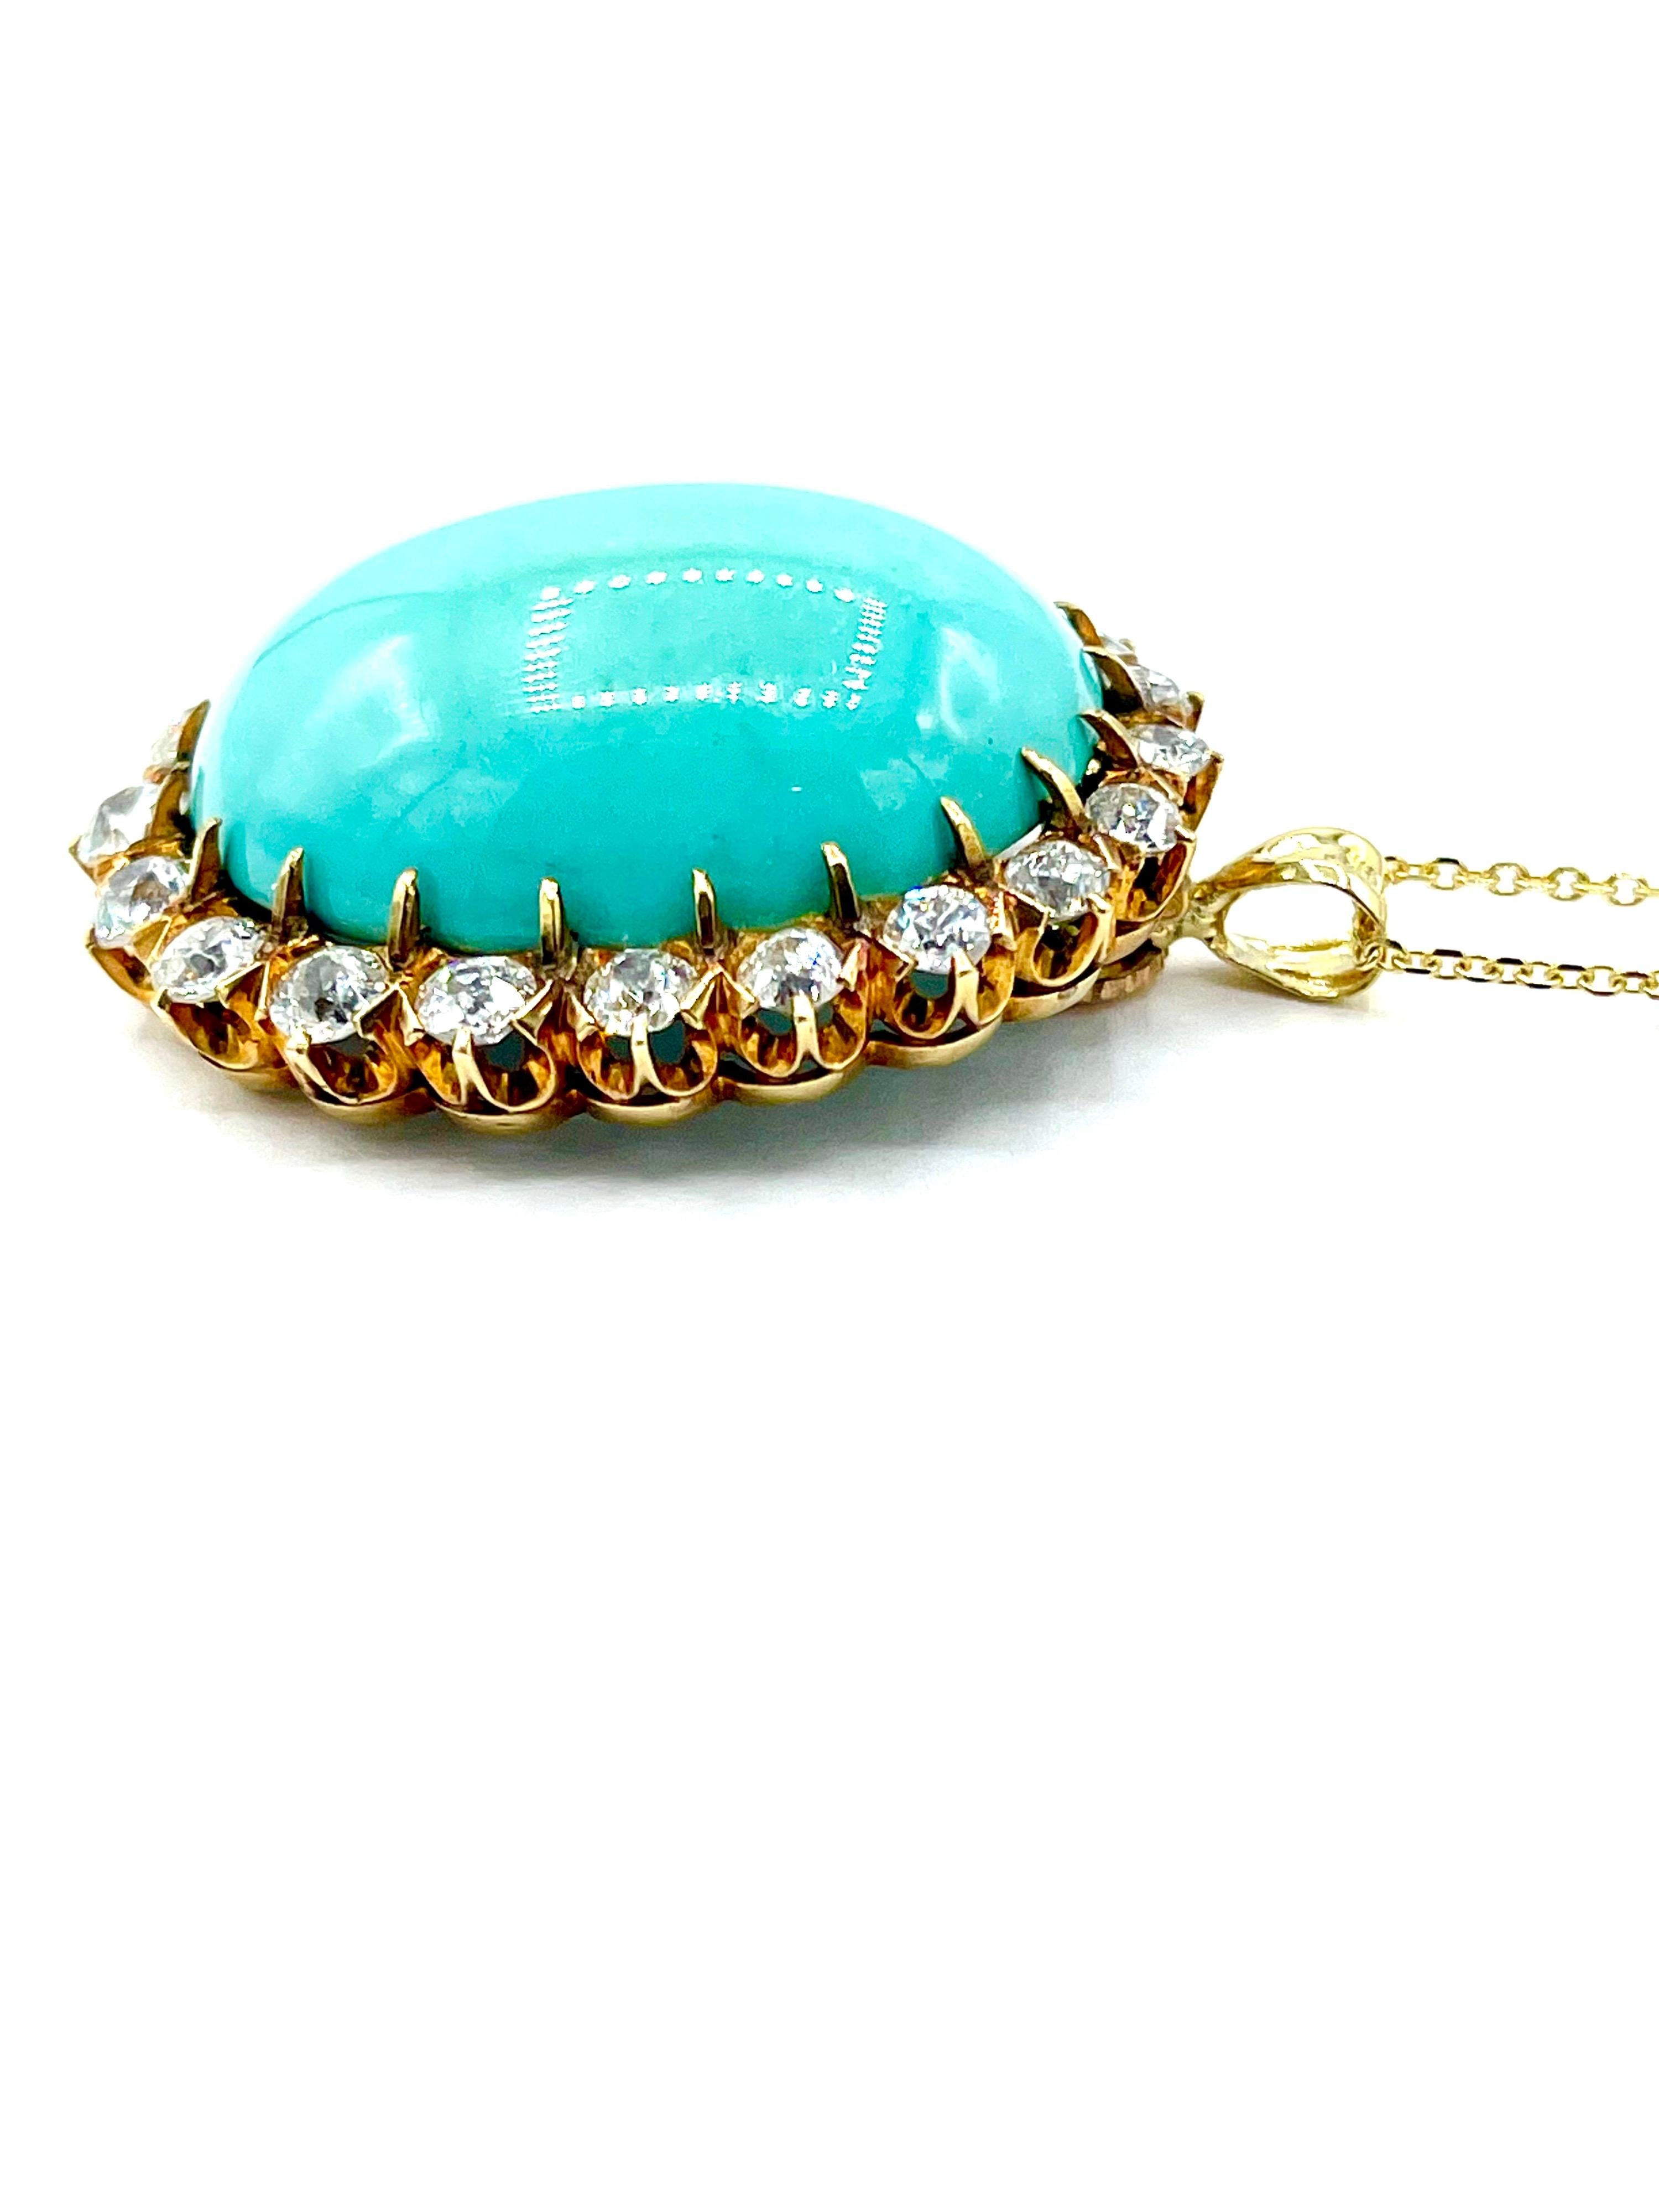 Cabochon Antique Turquoise and Old European Cut Diamond 18k Yellow Gold Pendant